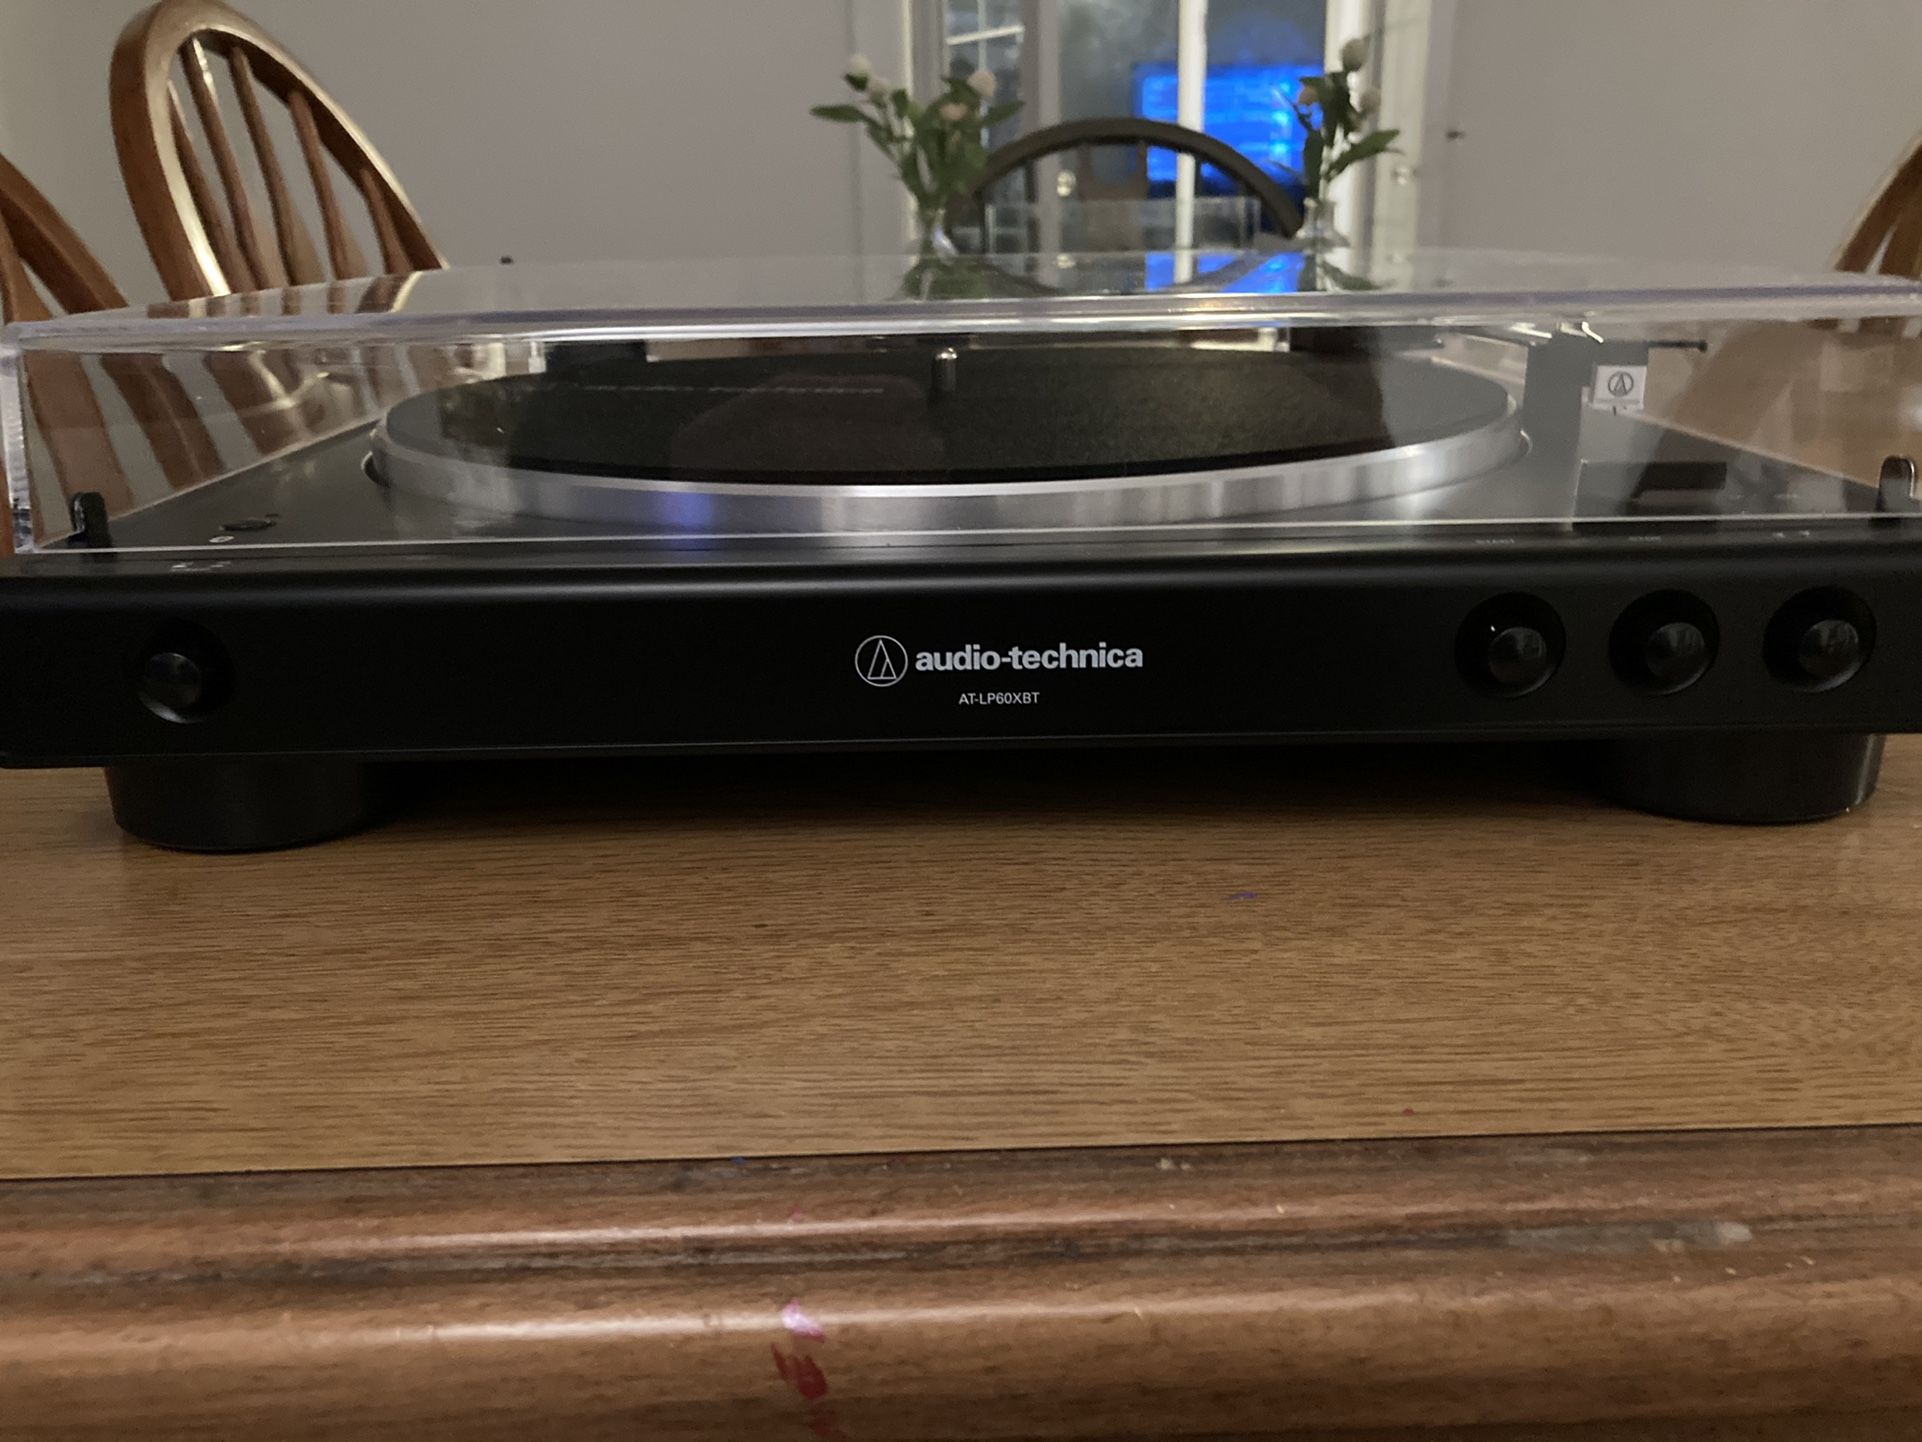 Audio Technica AT-LP60XBT record player with album